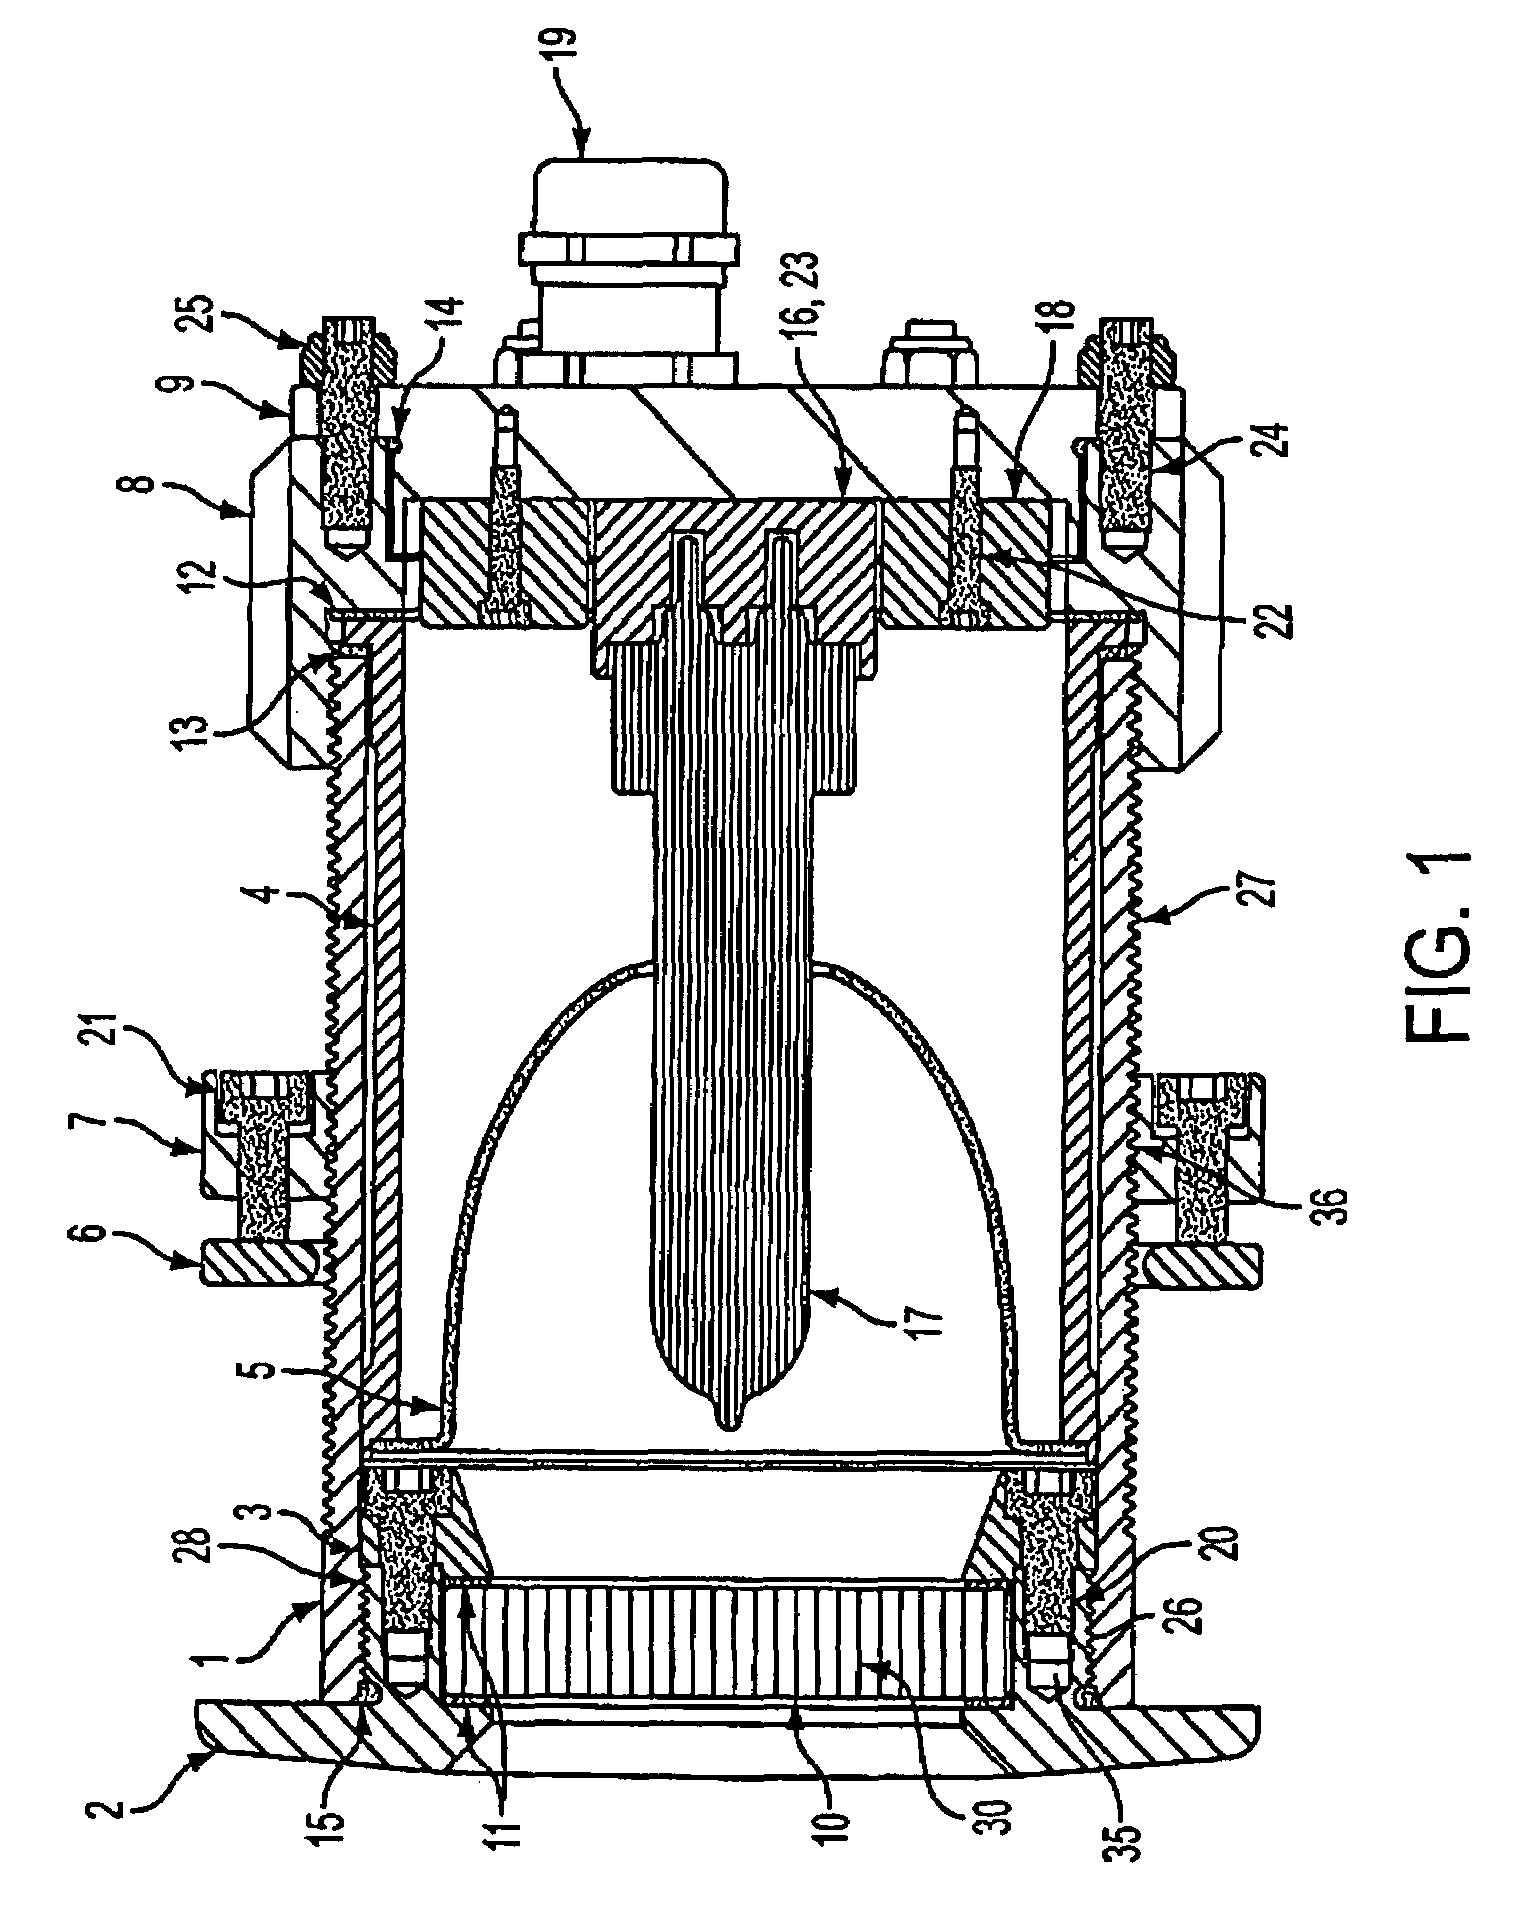 Two piece view port and light housing with integrated ballast and high intensity discharge lamp